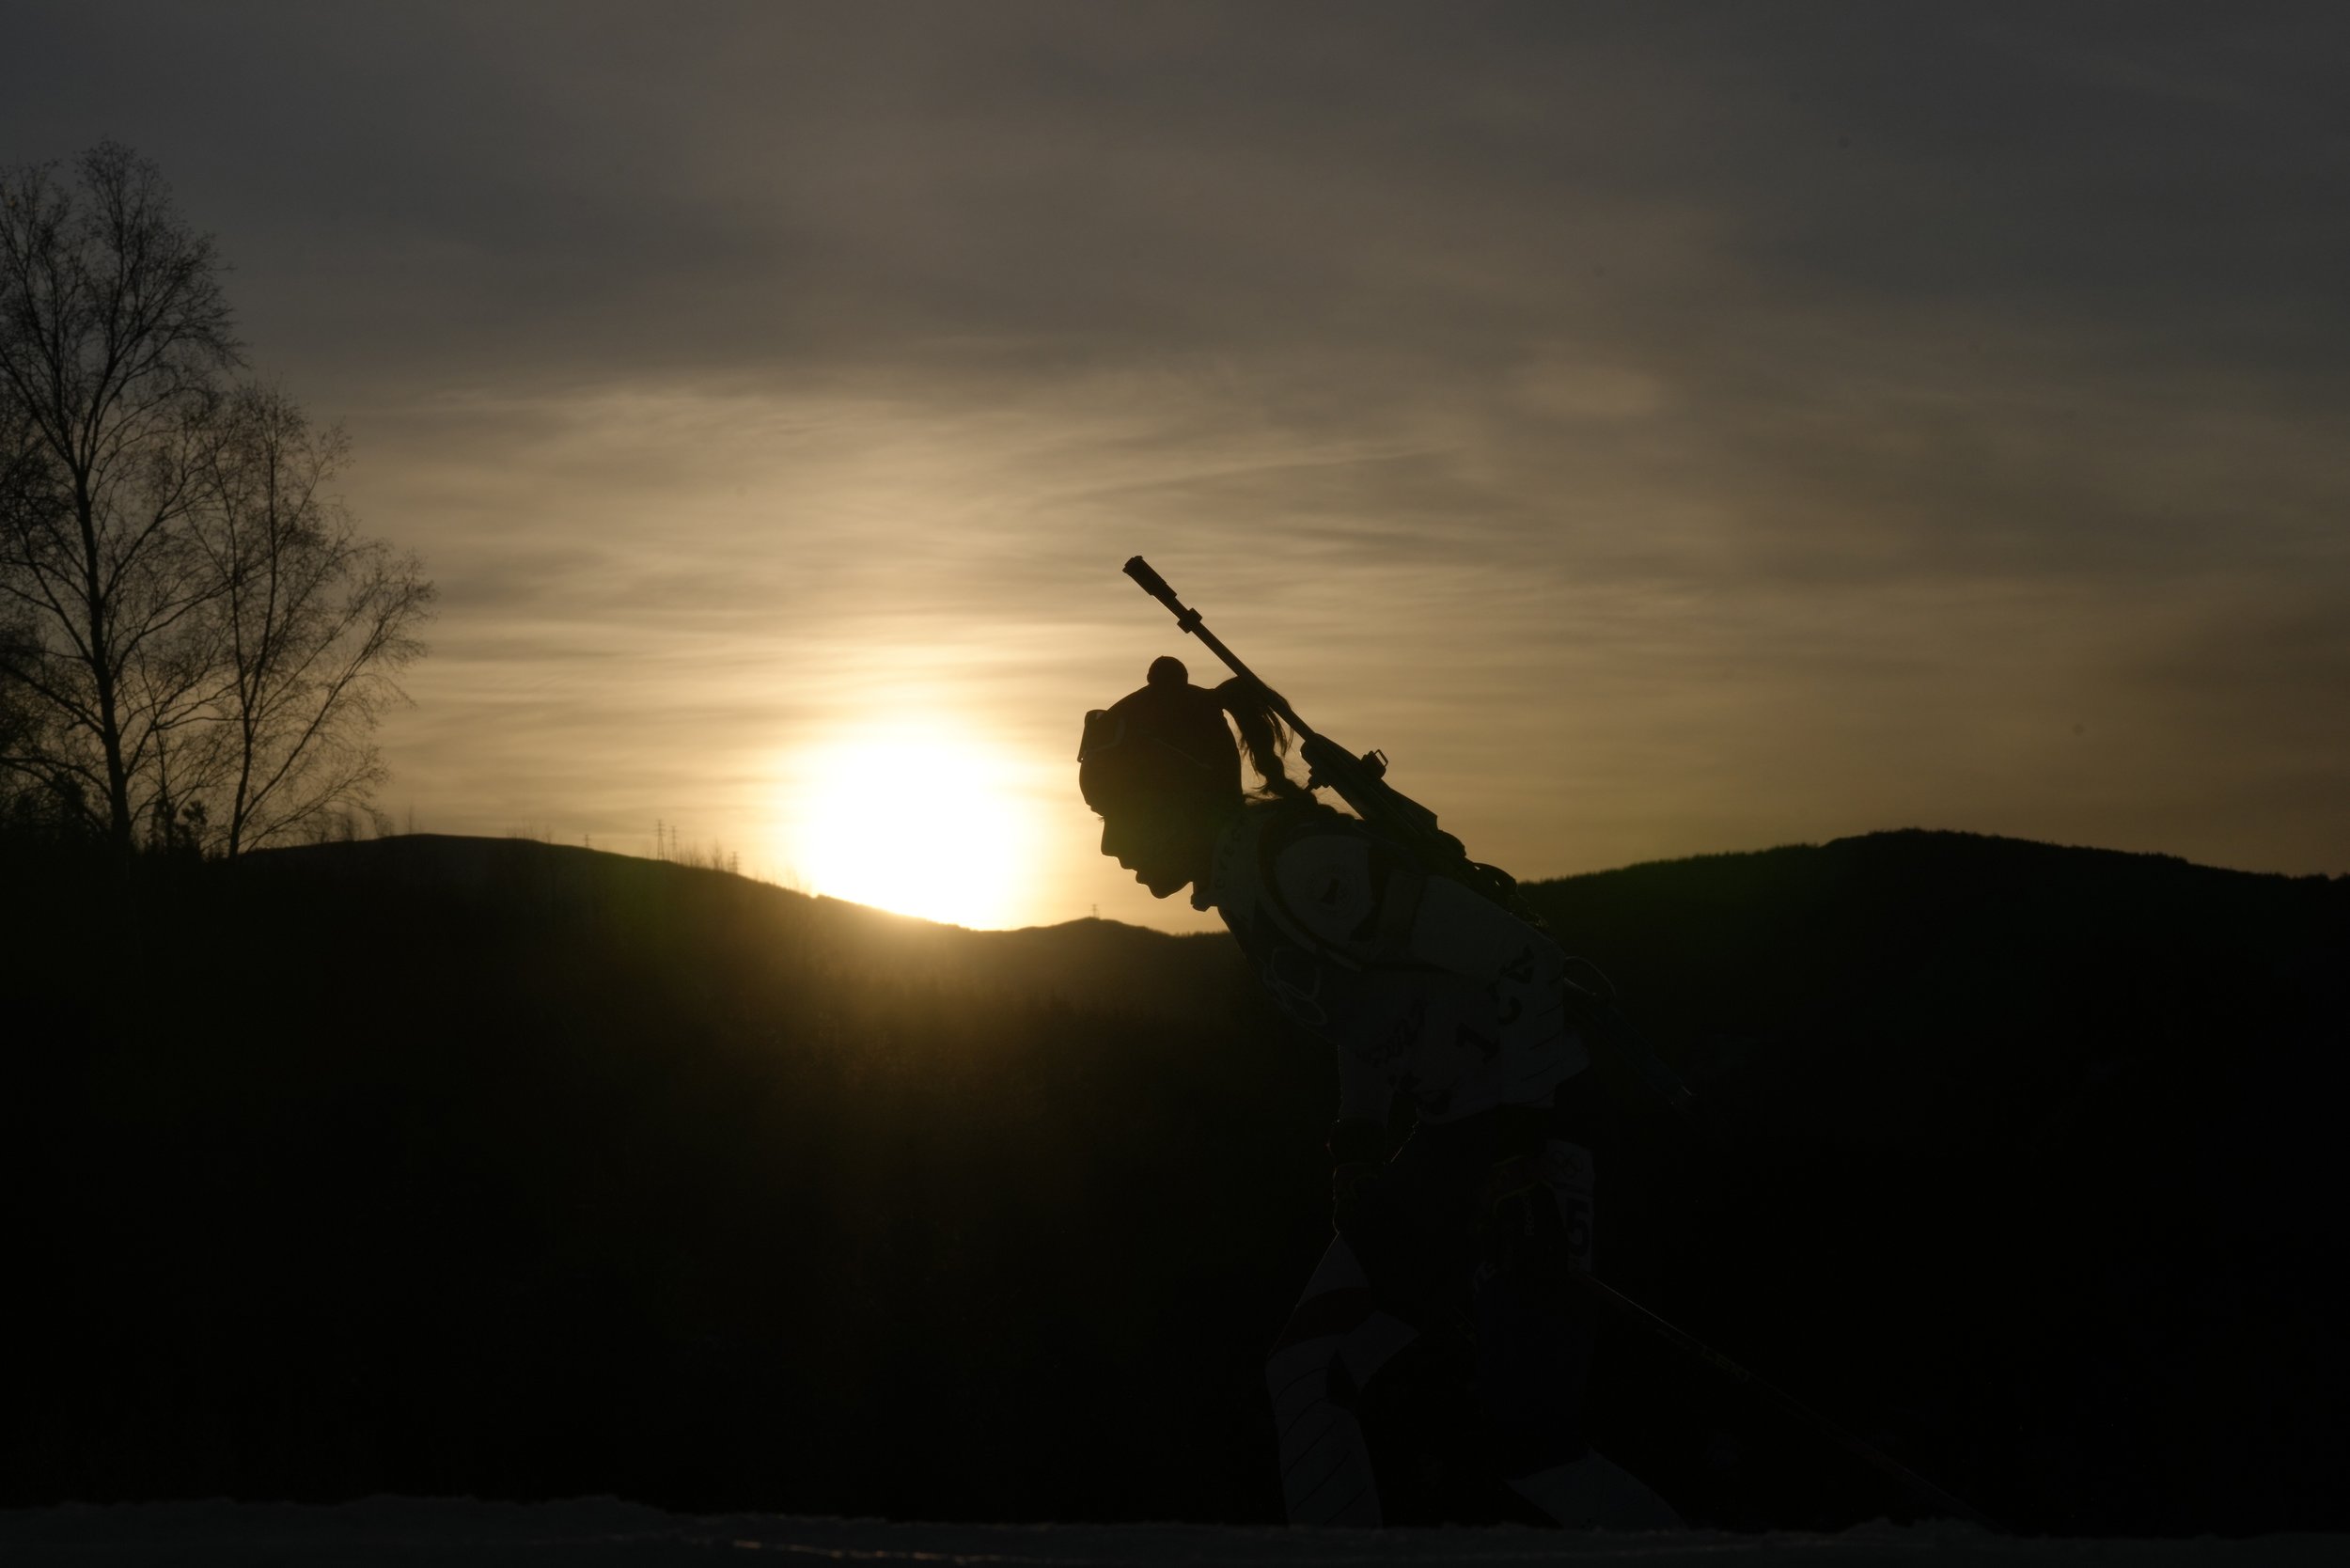  A biathlete is silhouetted against the setting sun during the women's 15-kilometer individual race at the 2022 Winter Olympics, Monday, Feb. 7, 2022, in Zhangjiakou, China. (AP Photo/Kirsty Wigglesworth) 